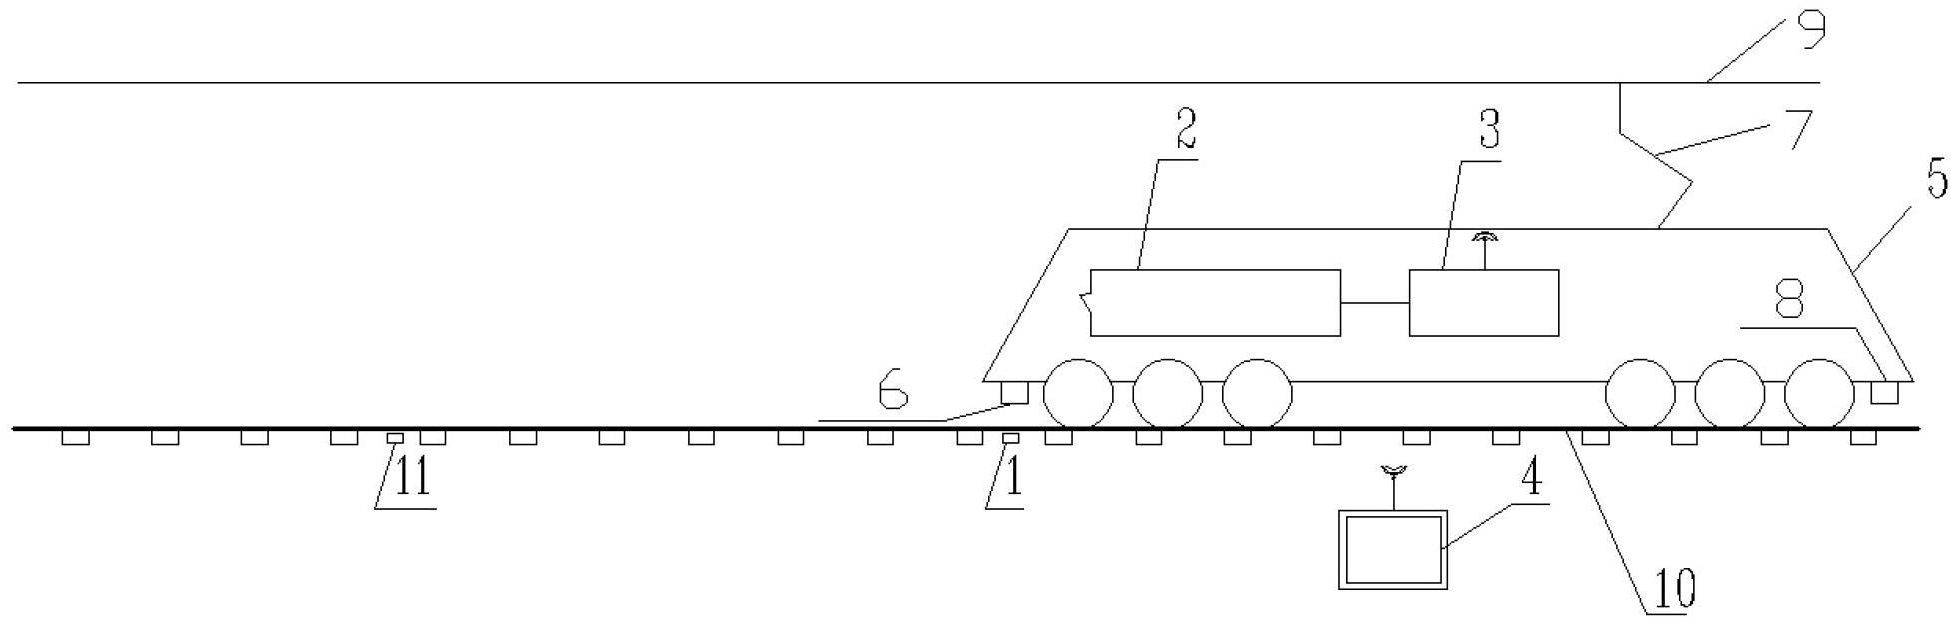 Detecting system for auto-passing phase-splitting function of electric locomotive